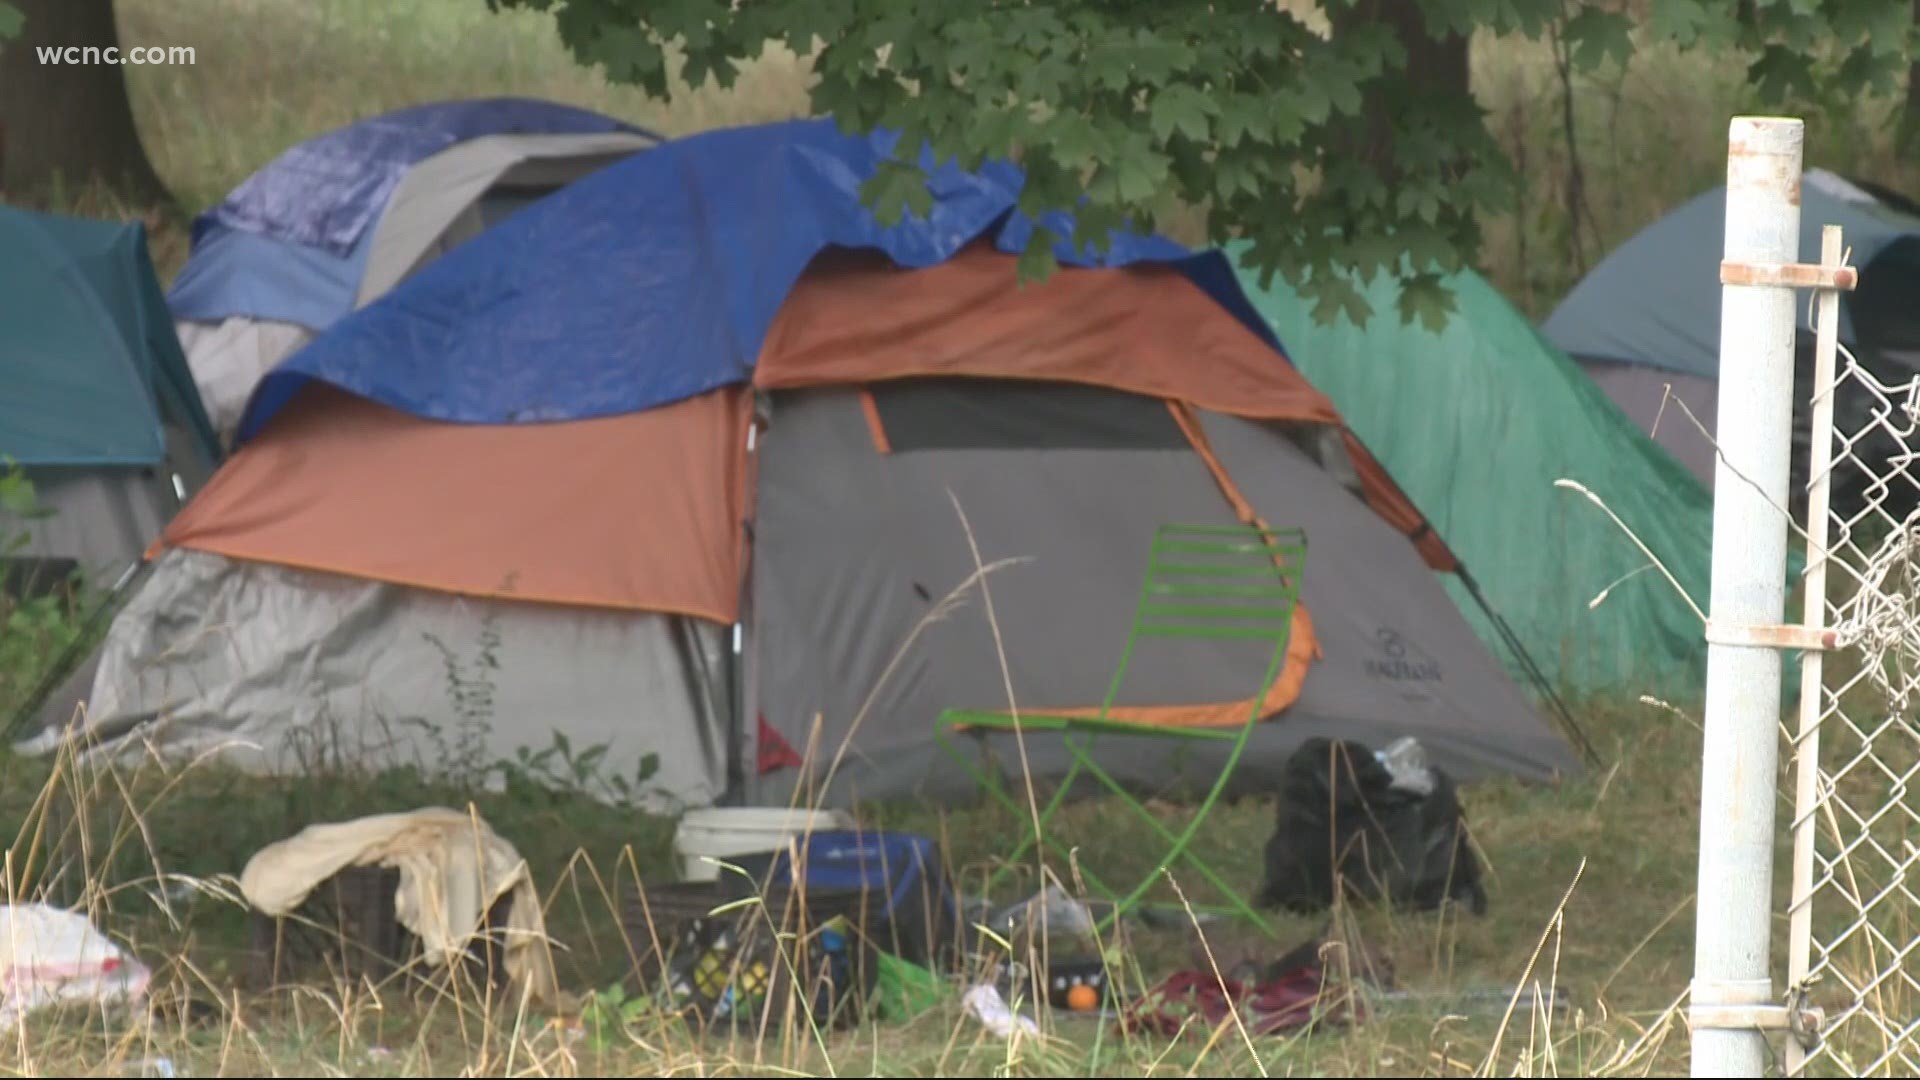 With more people facing homelessness and possible evictions in the long-term impact of the COVID-19 crisis, county leaders are sounding the alarm bell.